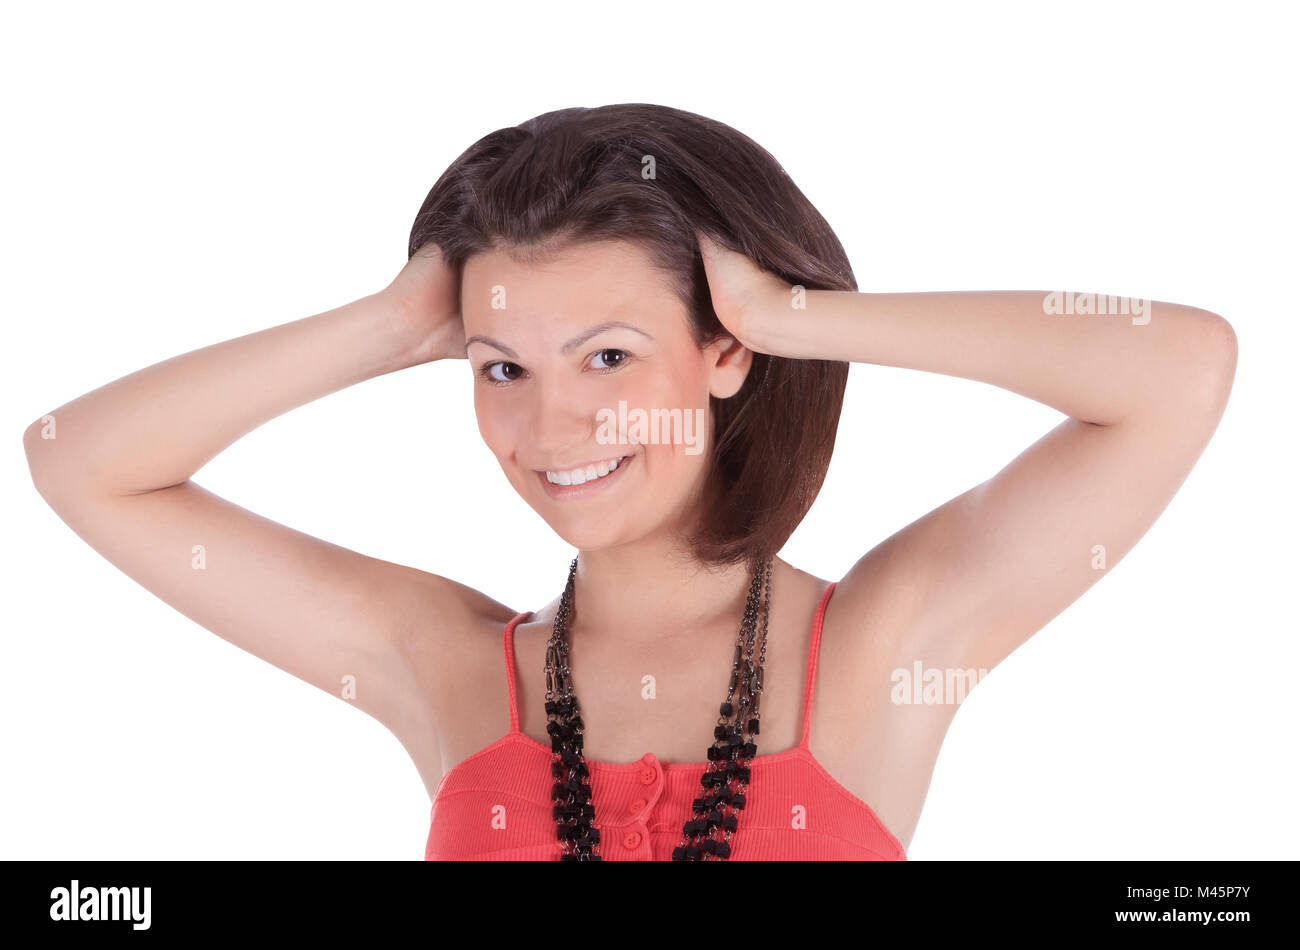 Smiling latino female in red dress posing over white Stock Photo